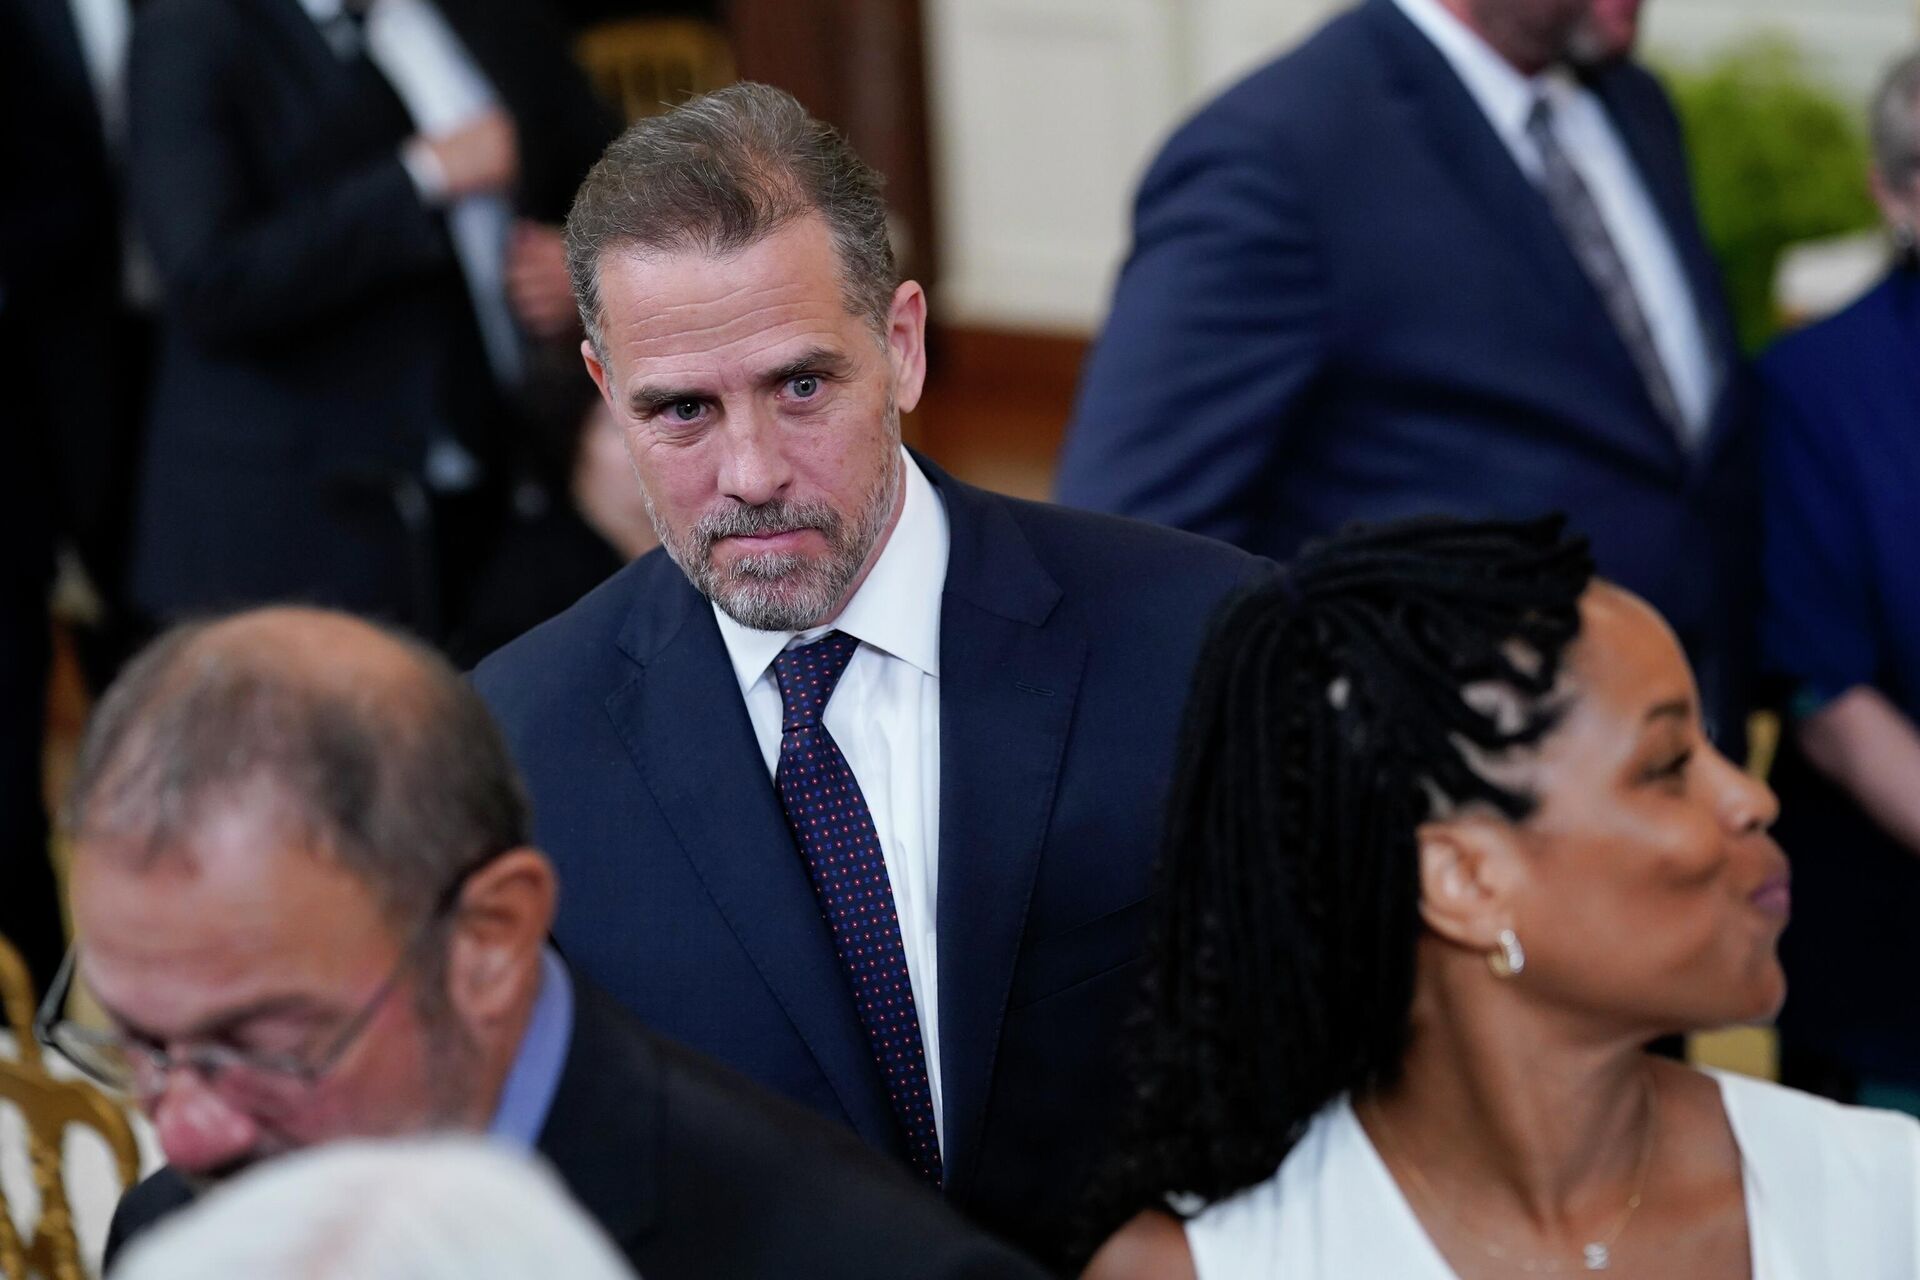 Hunter Biden leaves after President Joe Biden awarded the Presidential Medal of Freedom to 17 people during a ceremony in the East Room of the White House in Washington, Thursday, July 7, 2022 - Sputnik International, 1920, 26.08.2022